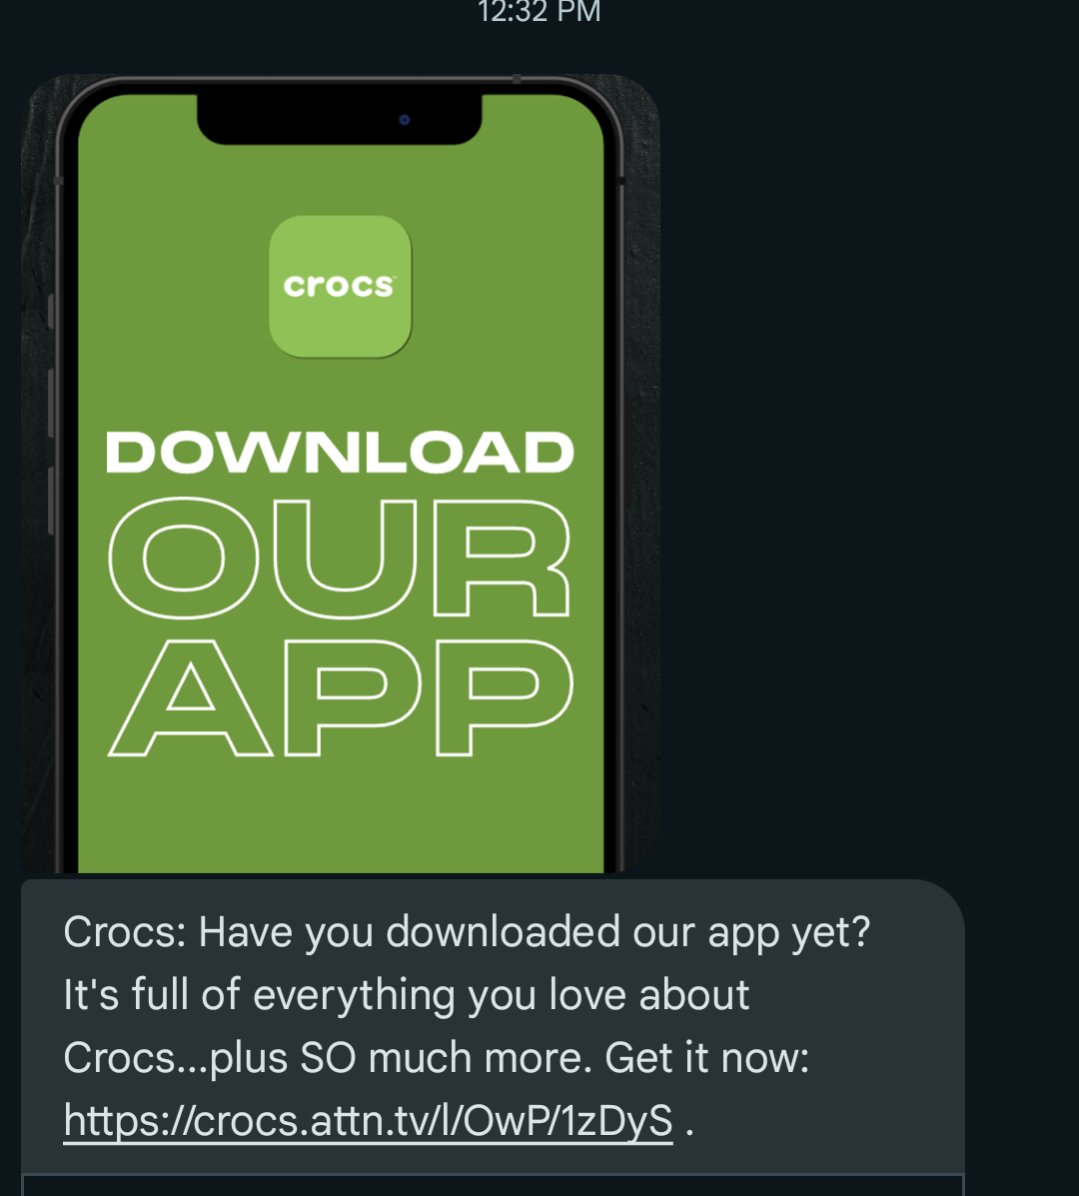 There is a Crocs app? I have so many questions...